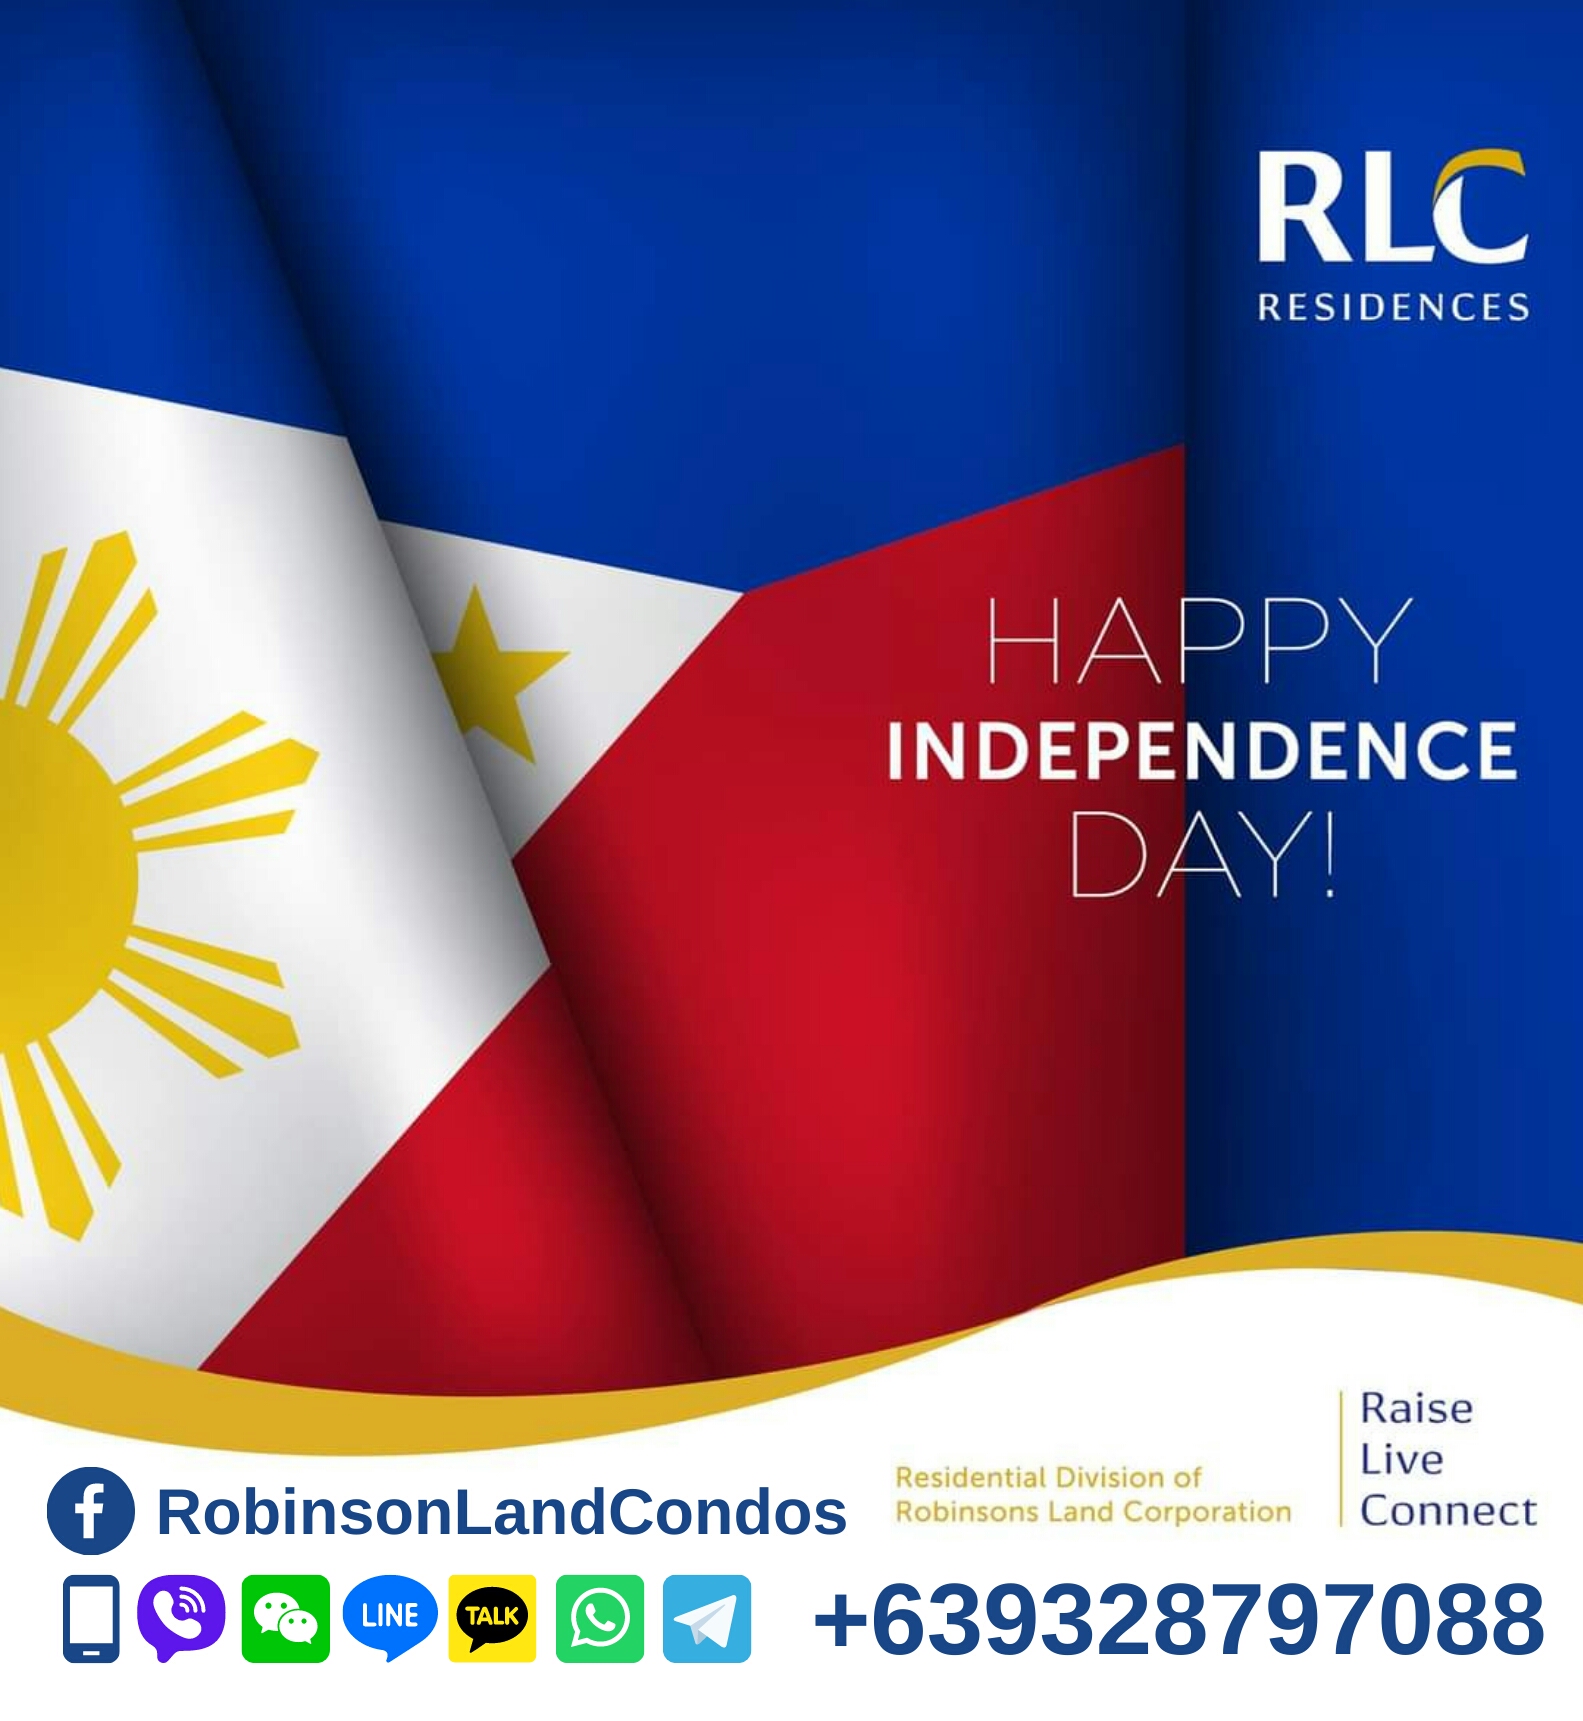 Rlc Residences Residential Division Of Robinsons Land Corporation Happy 123rd Philippine Independence Day